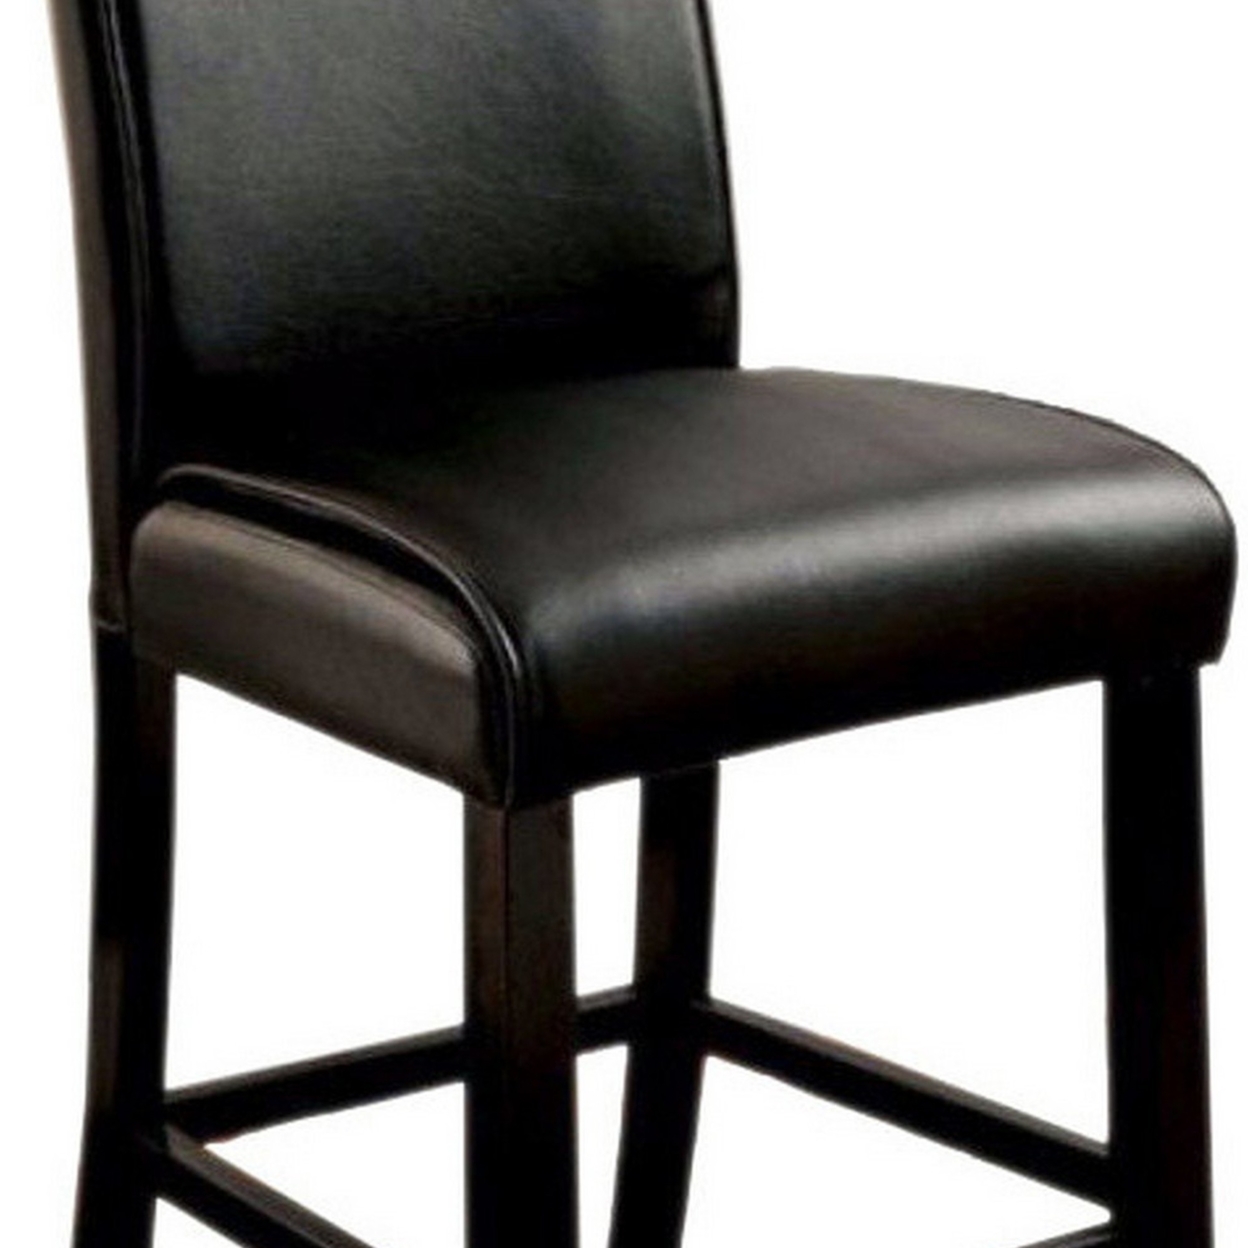 Leatherette Counter Height Chair With Wooden Legs, Set Of 2, Black- Saltoro Sherpi